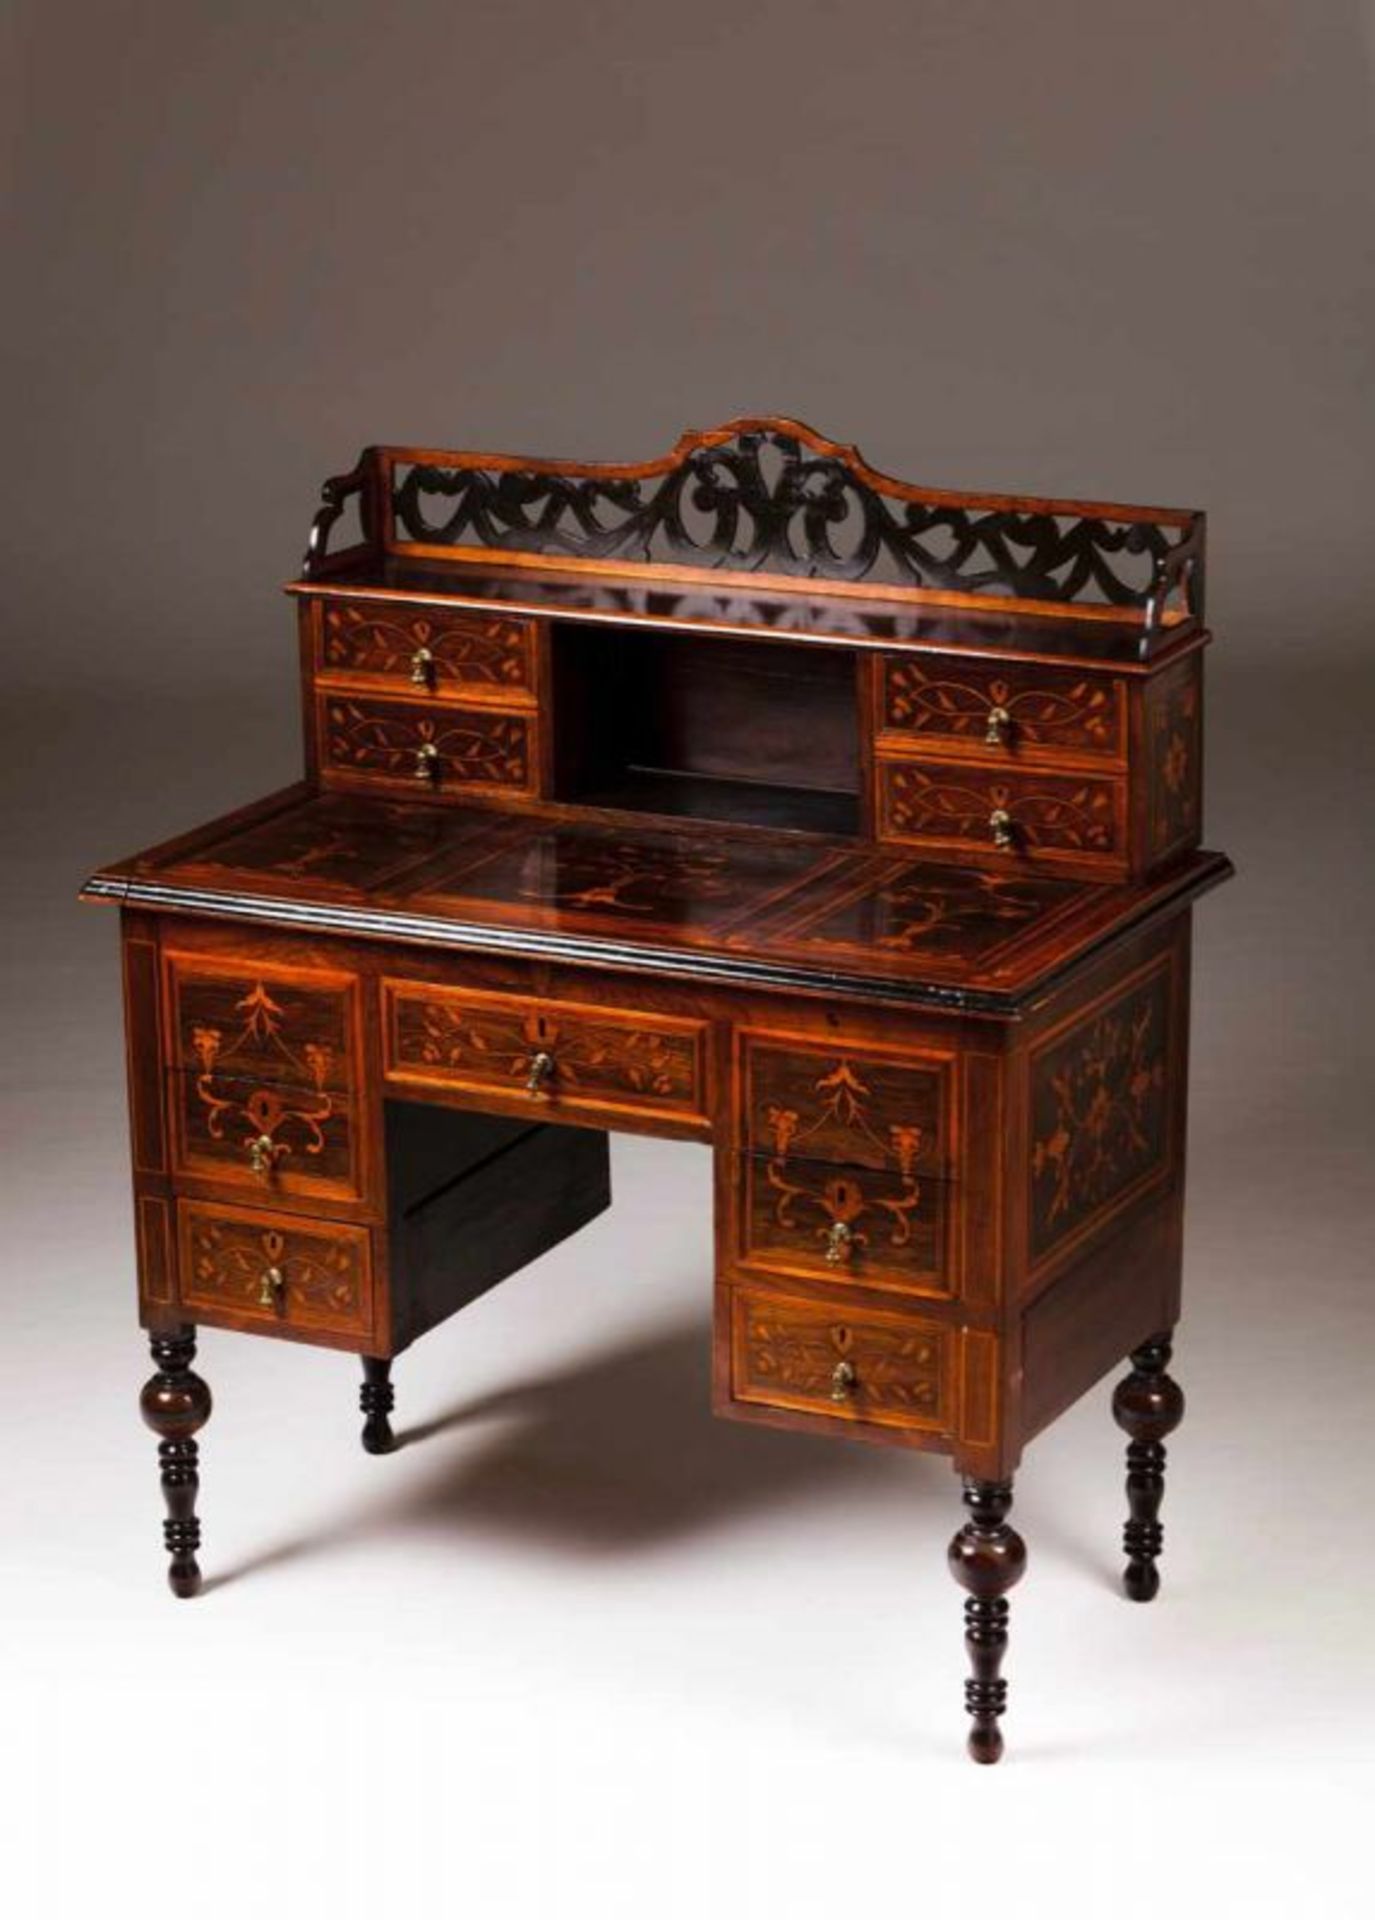 A D.Maria style bureau Rosewood with satinwood marquetry decoration depicting floral motifs Pierced